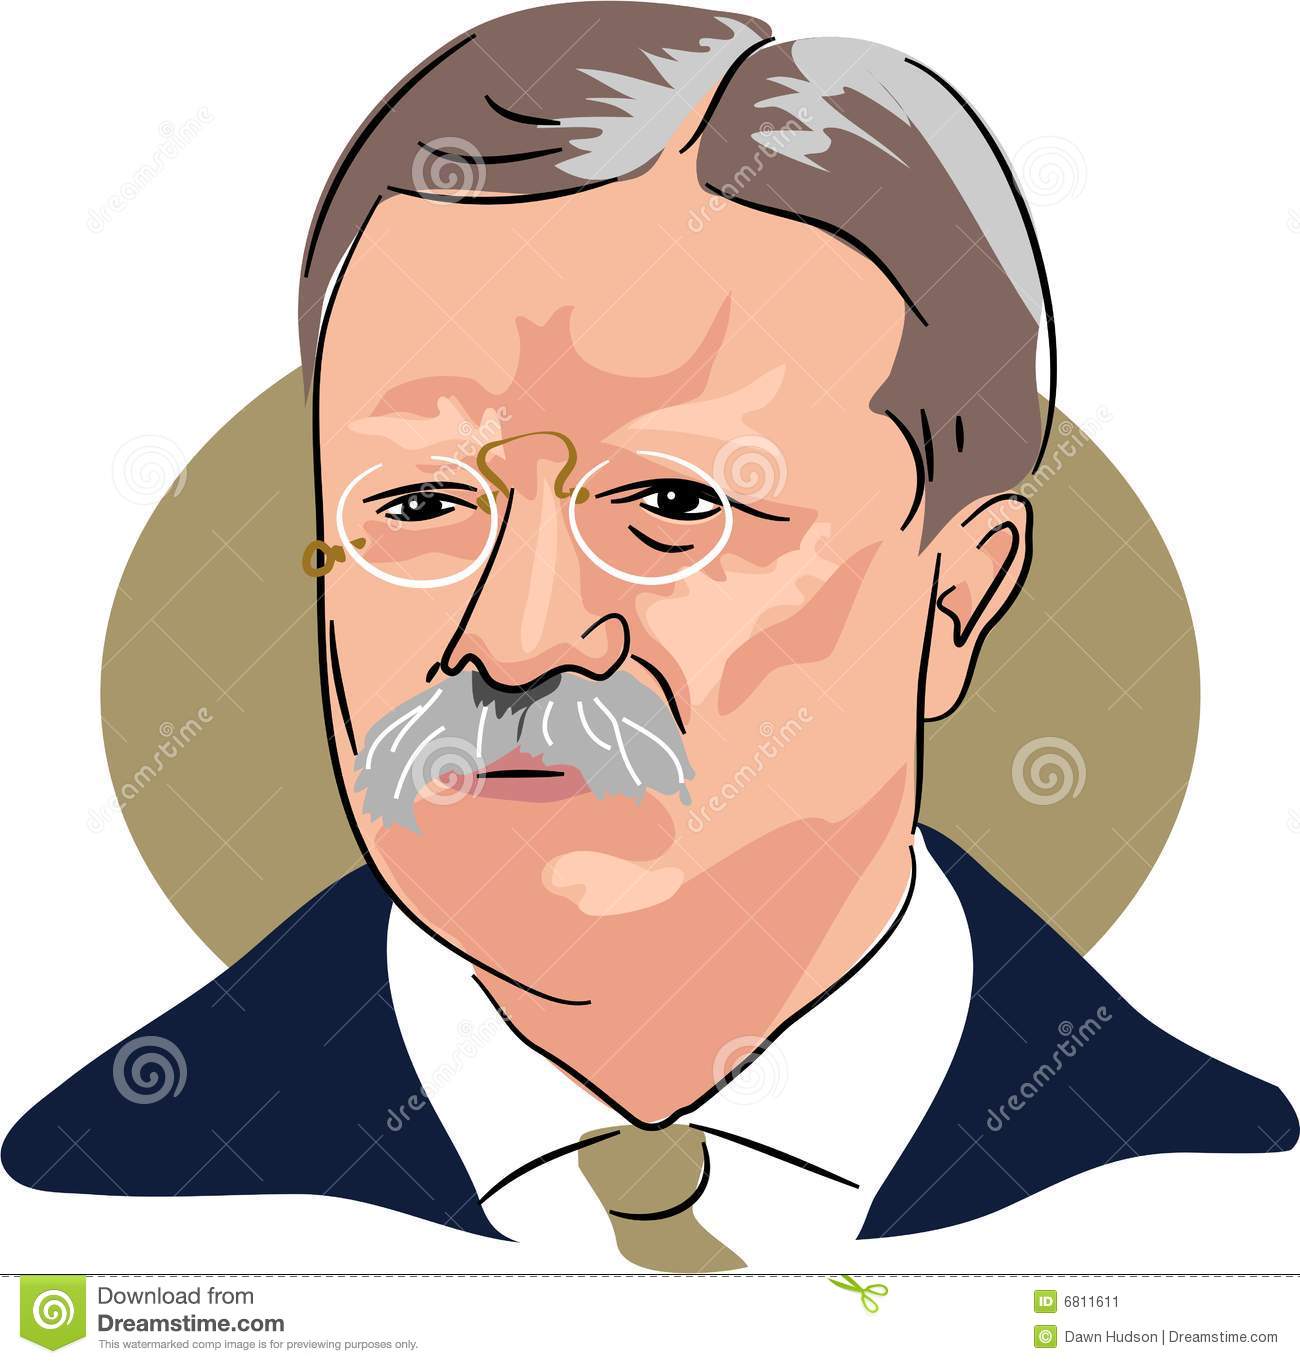 Theodore Roosevelt clipart #16, Download drawings